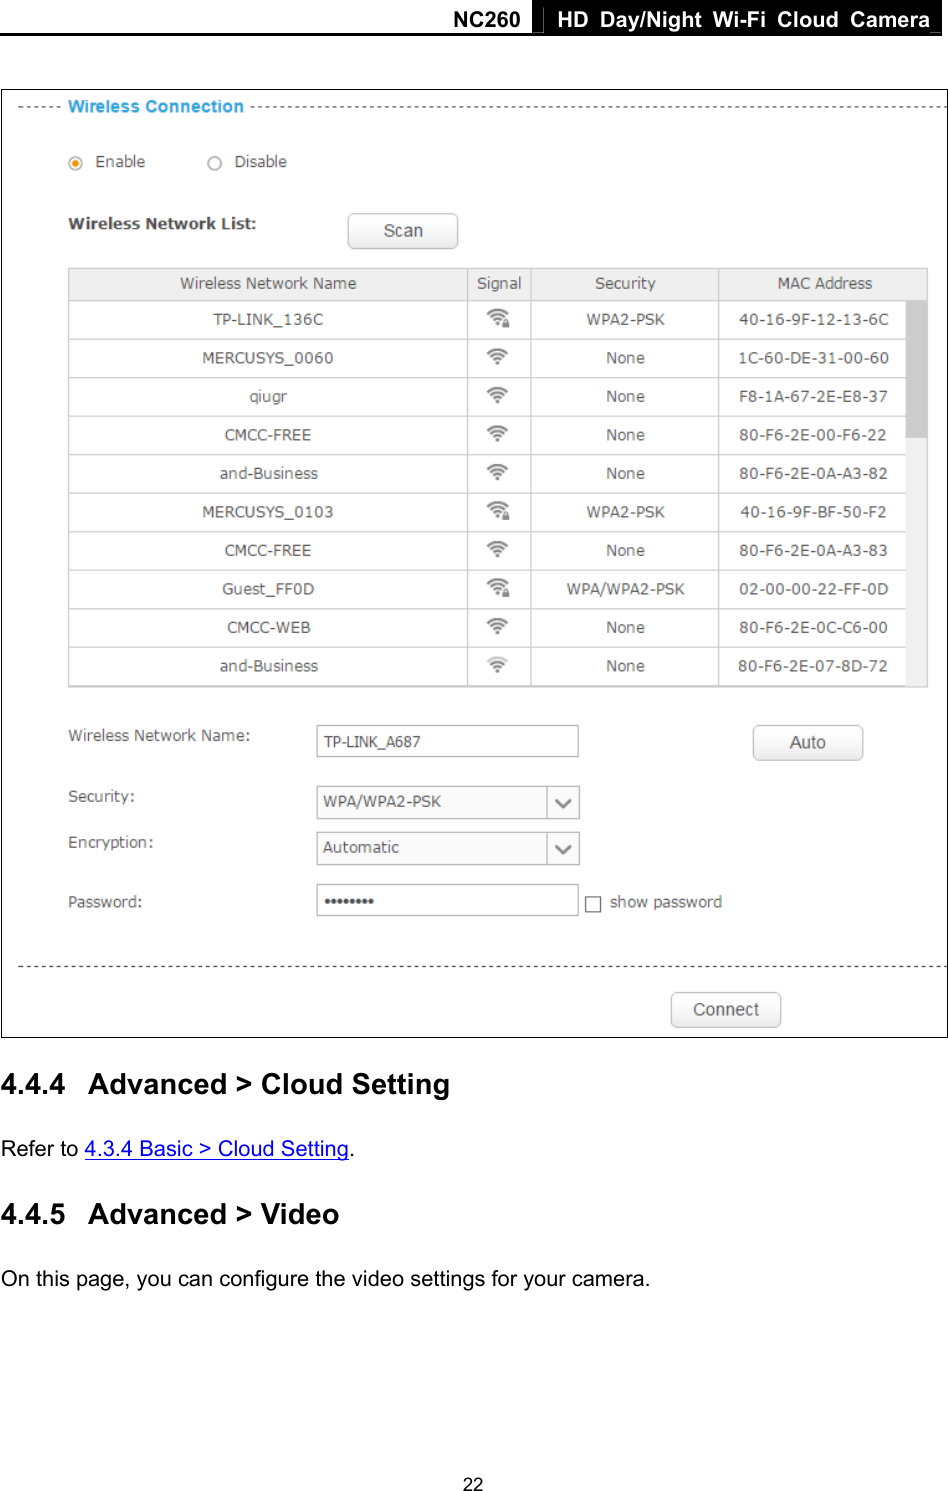     NC260 HD Day/Night Wi-Fi Cloud Camera 22   4.4.4  Advanced &gt; Cloud Setting Refer to 4.3.4 Basic &gt; Cloud Setting. 4.4.5  Advanced &gt; Video On this page, you can configure the video settings for your camera. 